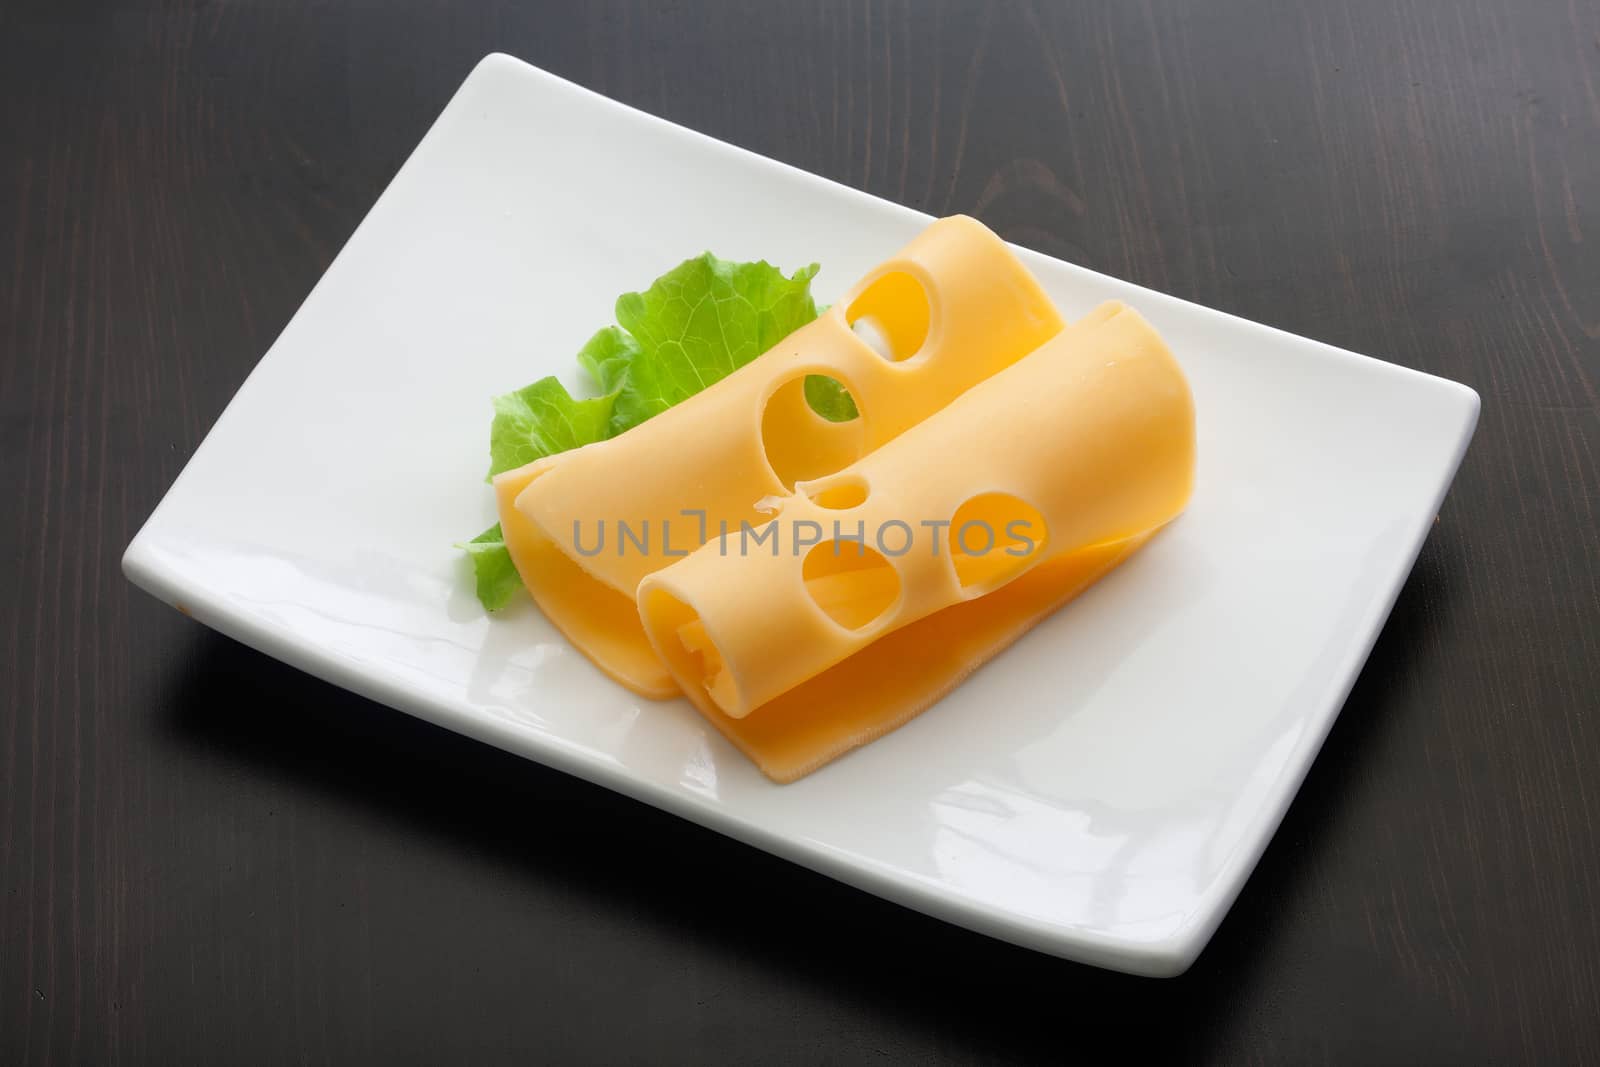 White plate with two pieces of maasdam cheese and fresh green lettuce on the black wooden table